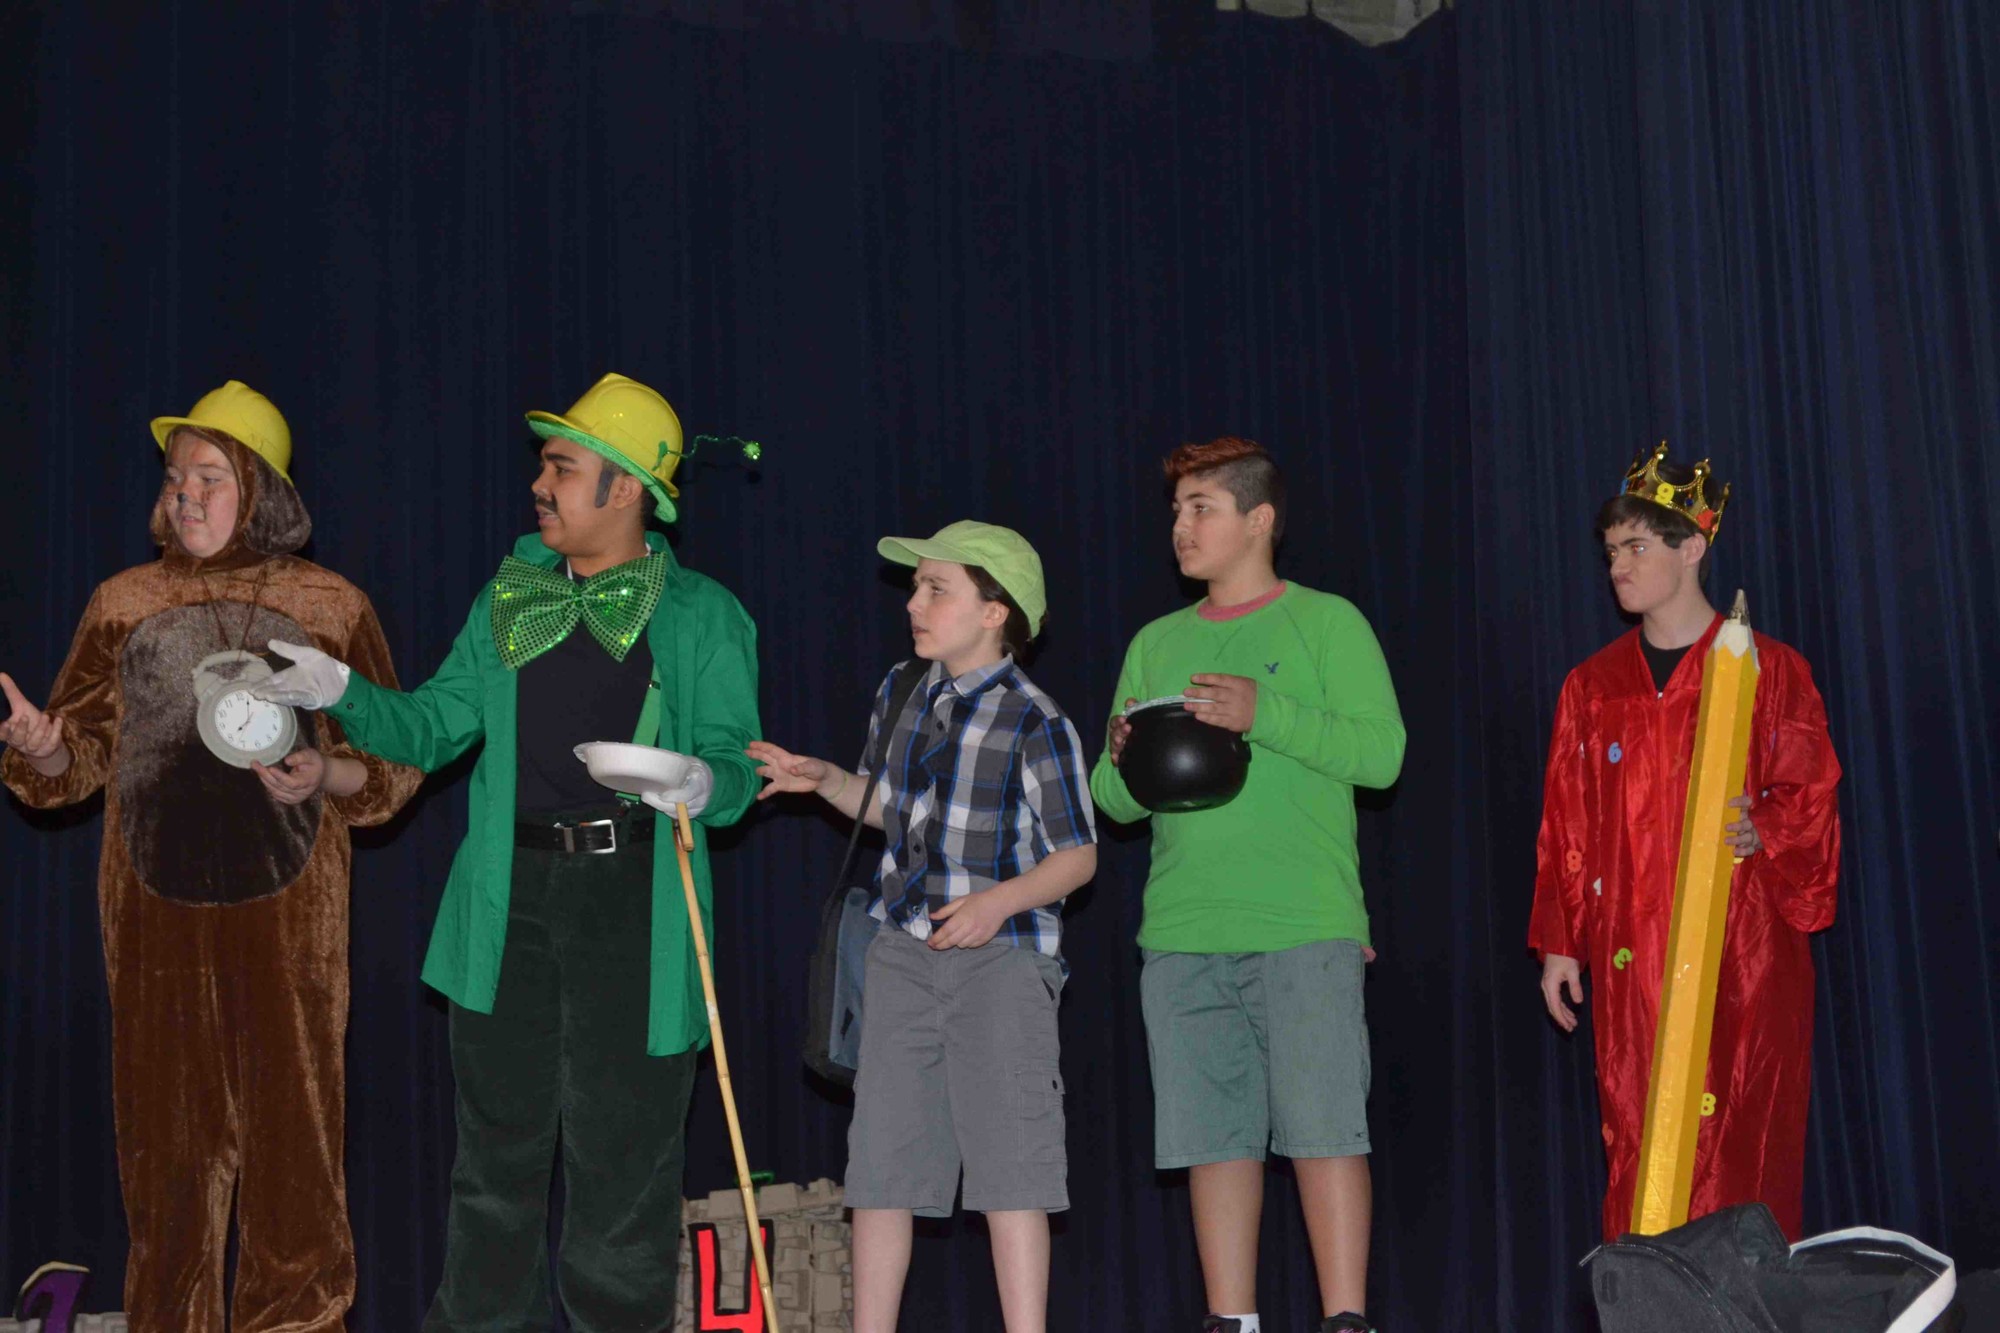 A talented cast of Long Beach Middle School students took the stage and presented “Phantom Tollbooth.” Natalie Goggin, center, played Milo, the main character, who embarked on a journey through a land of adventures.